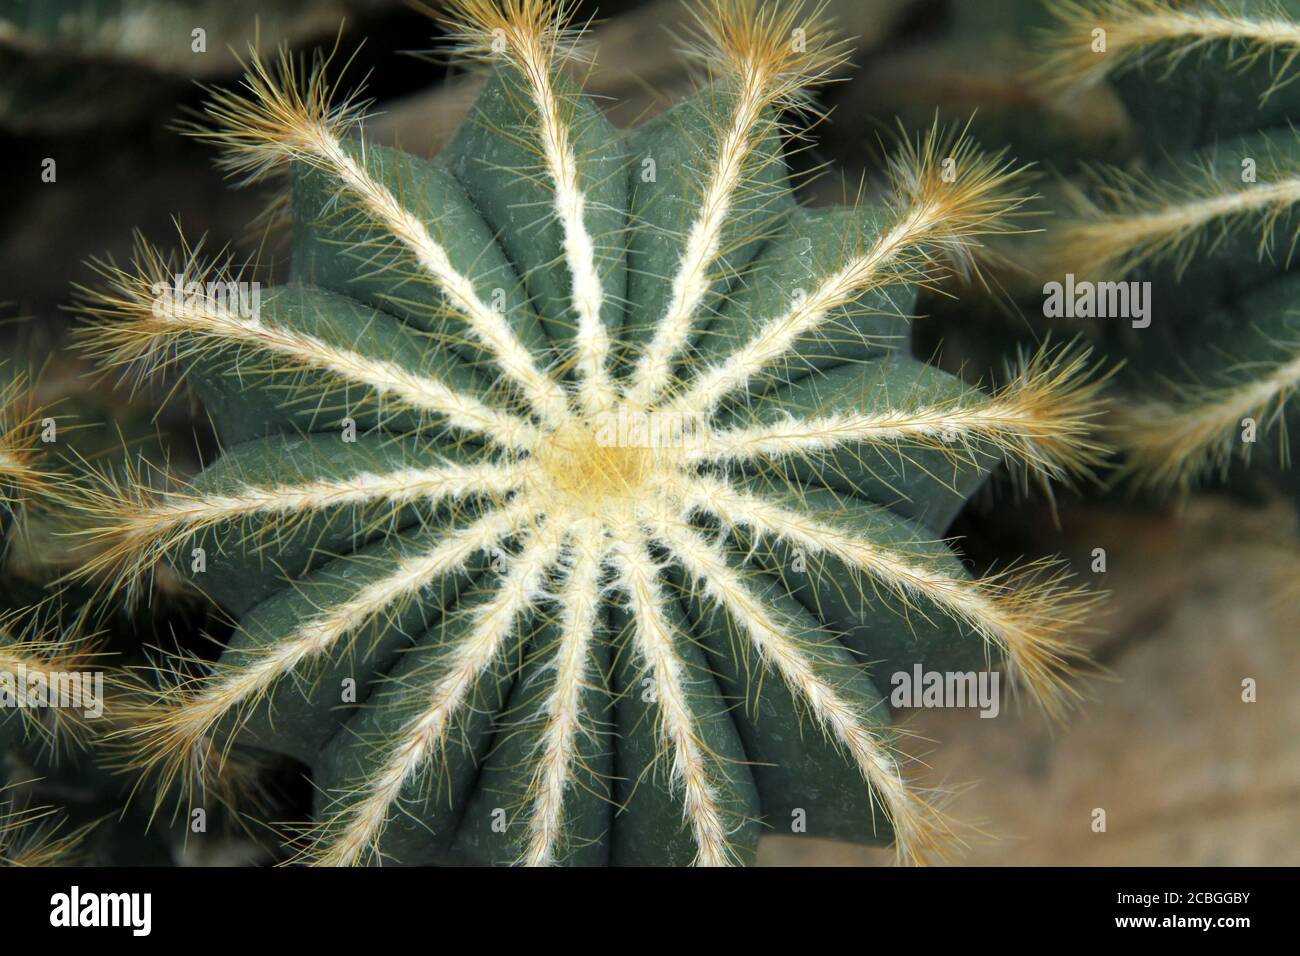 Parodia magnifica cactus viewed from above Stock Photo